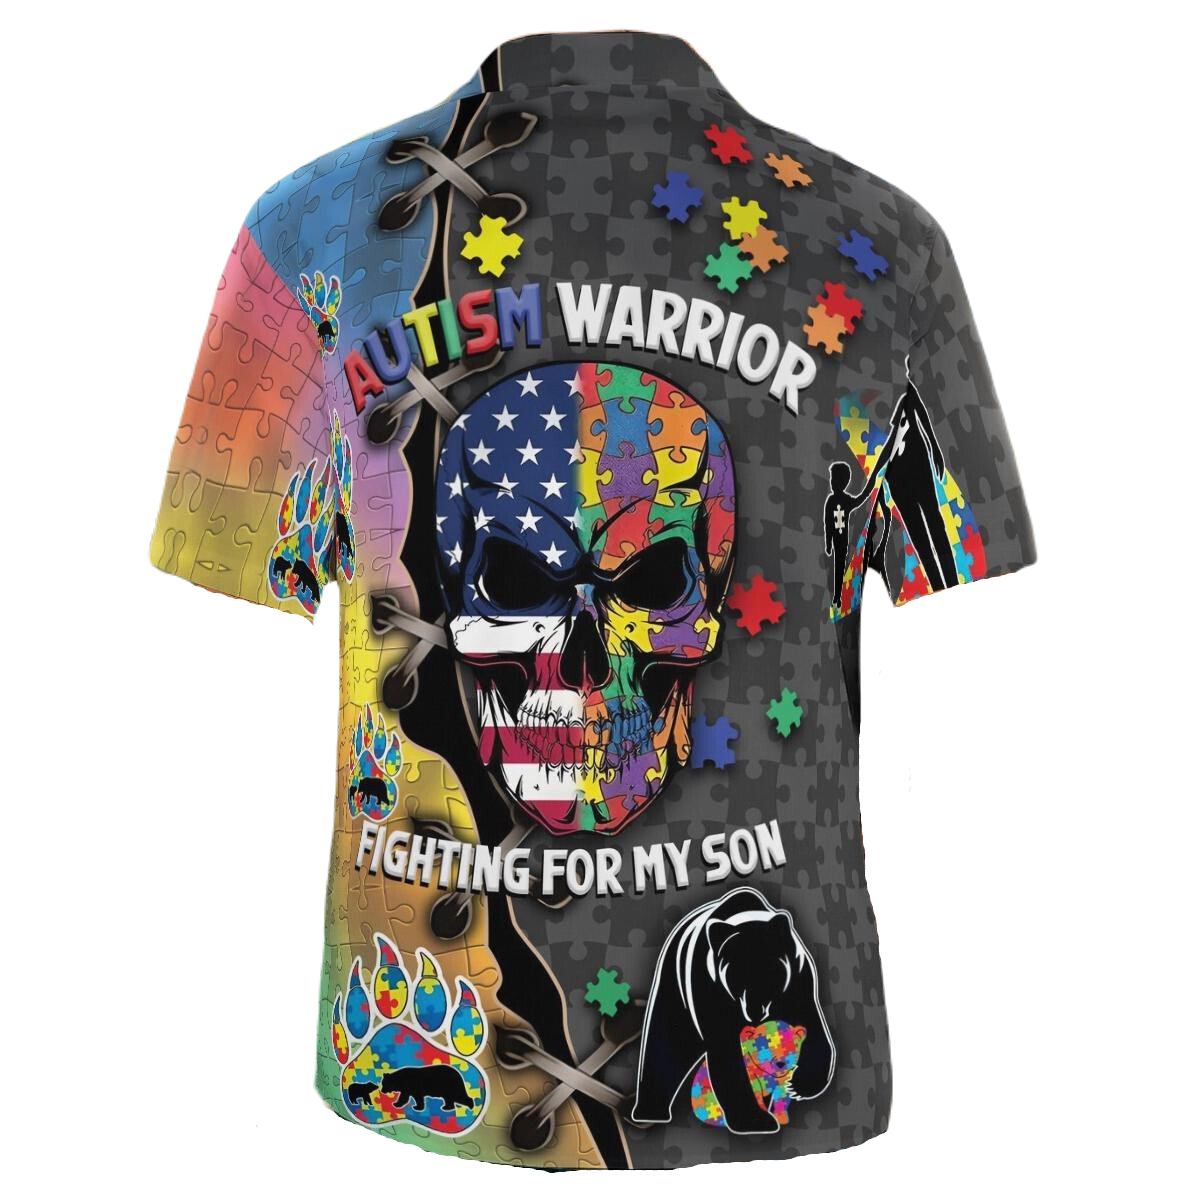 Autism Hawaii Shirt Autism Warrior Fighting For My Son Aloha Shirt Colorful Unisex